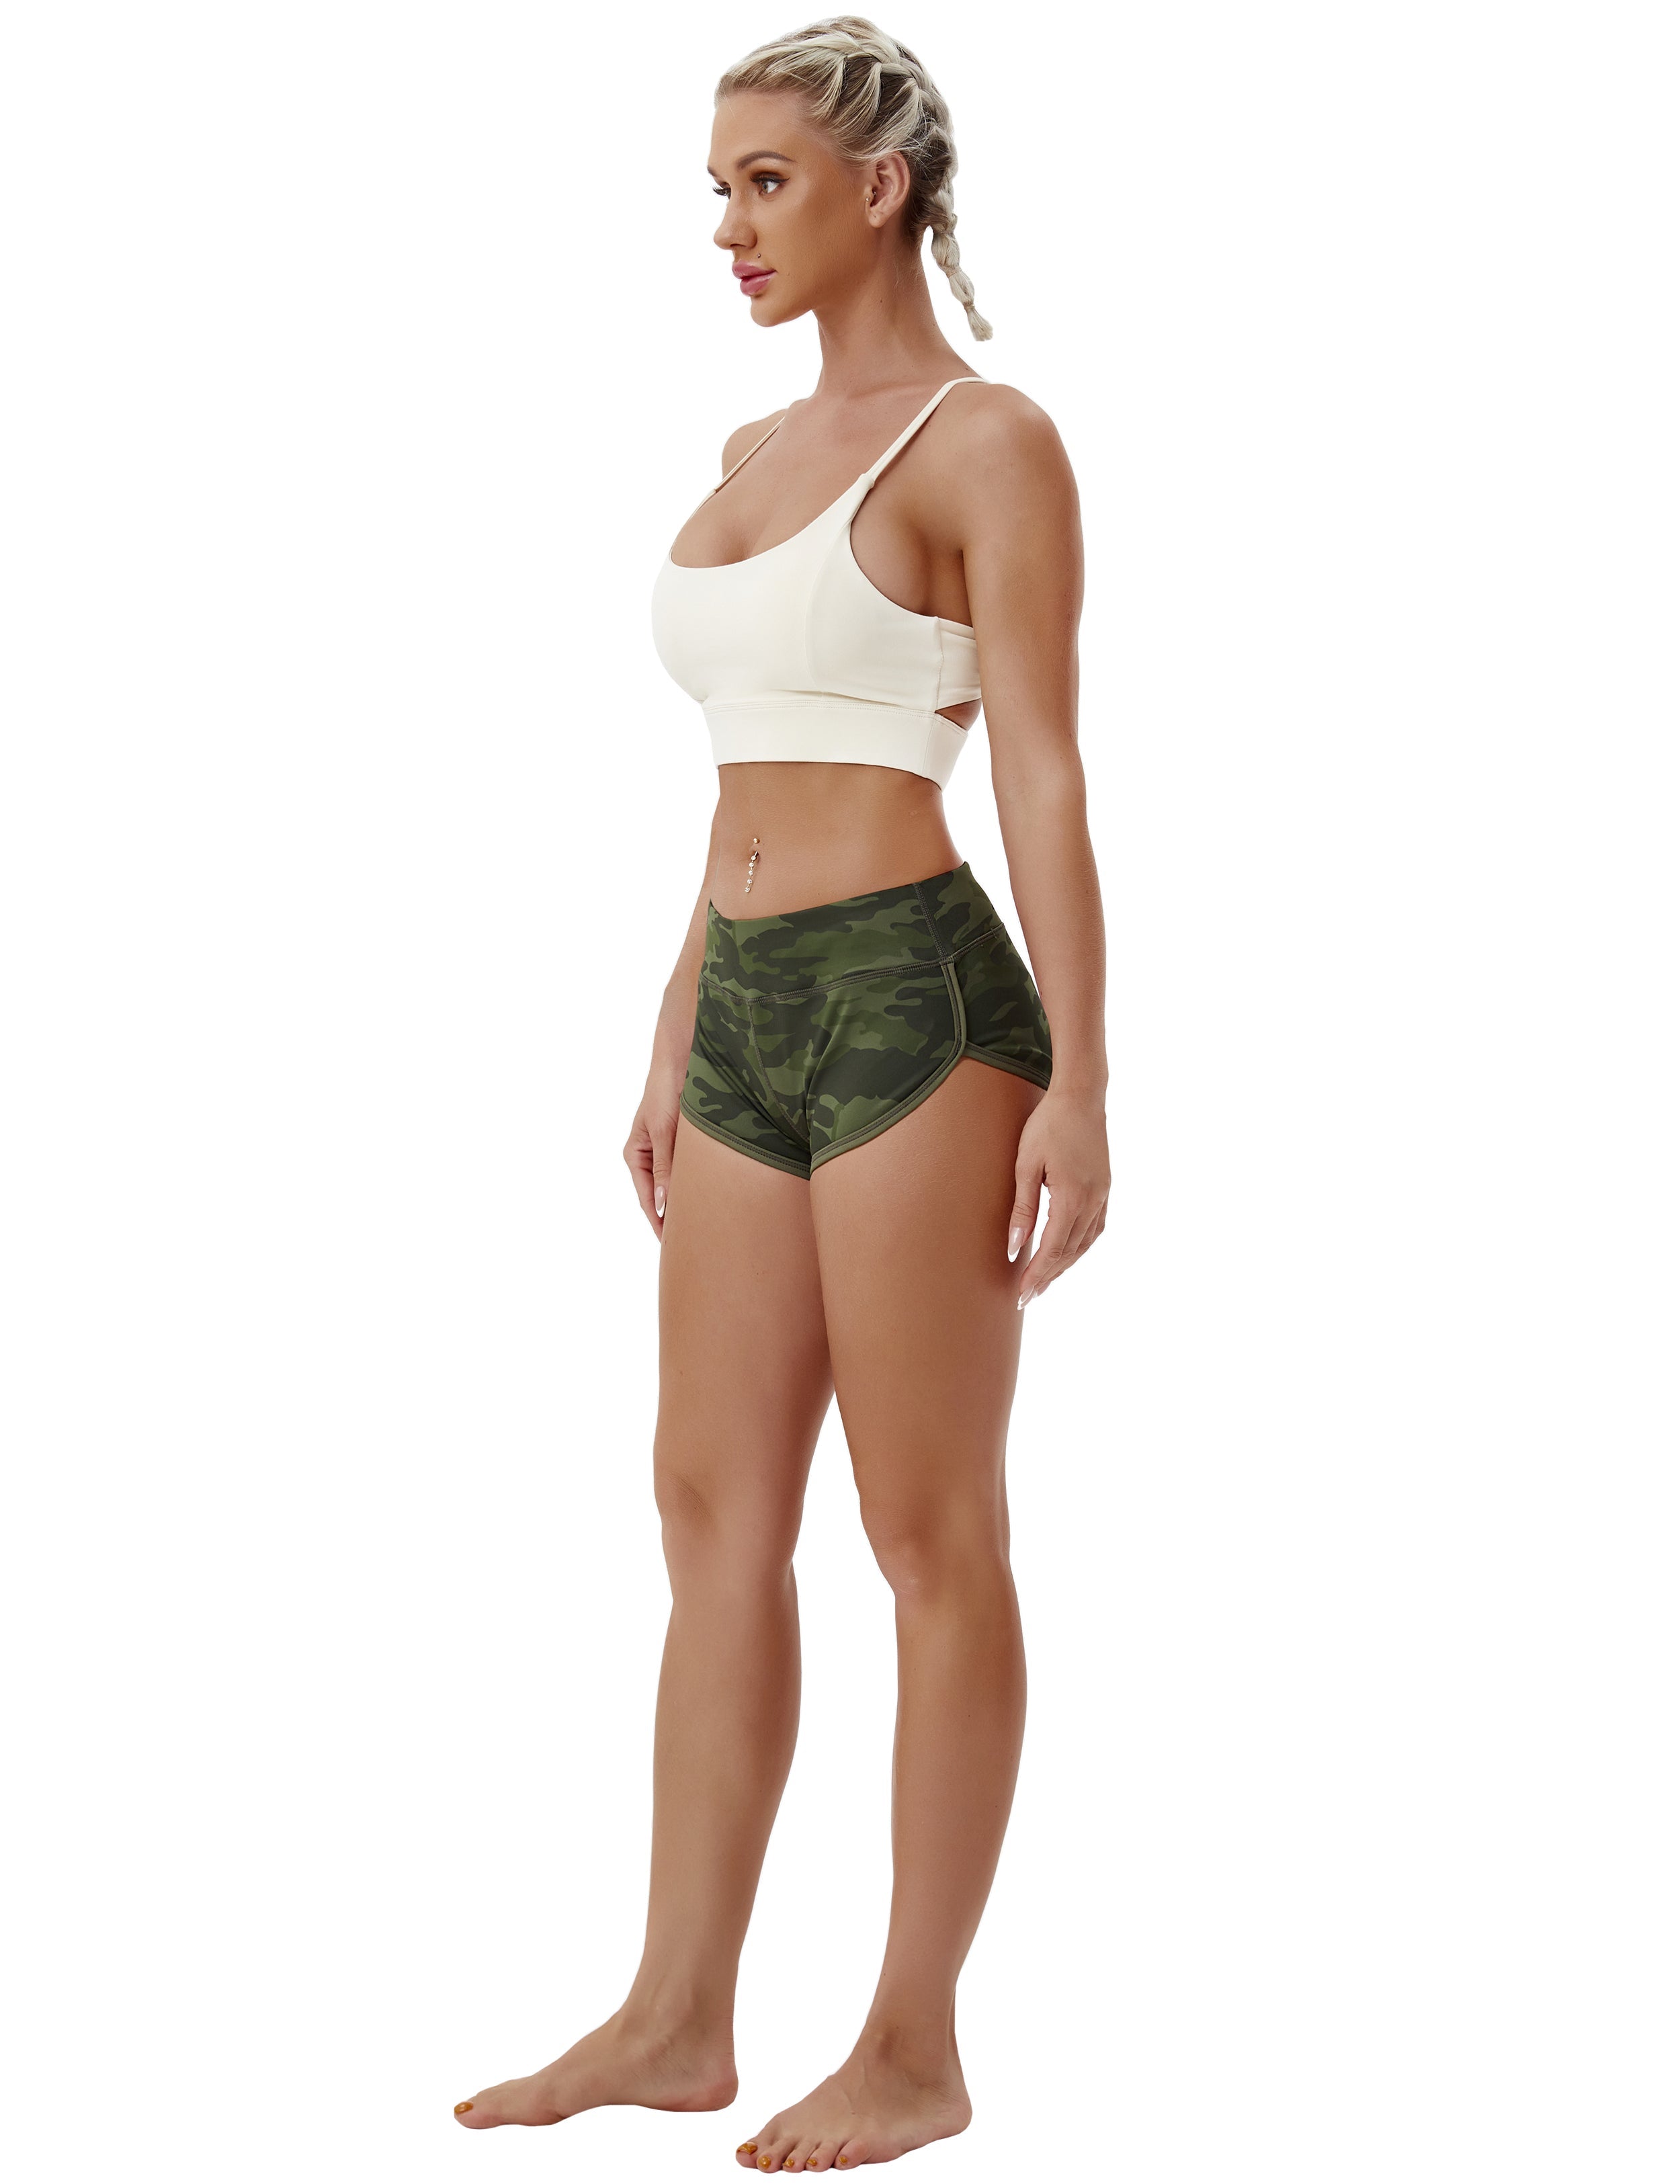 Printed Booty Plus Size Shorts green camo Sleek, soft, smooth and totally comfortable: our newest sexy style is here. Softest-ever fabric High elasticity High density 4-way stretch Fabric doesn't attract lint easily No see-through Moisture-wicking Machine wash 78% Polyester, 22% Spandex